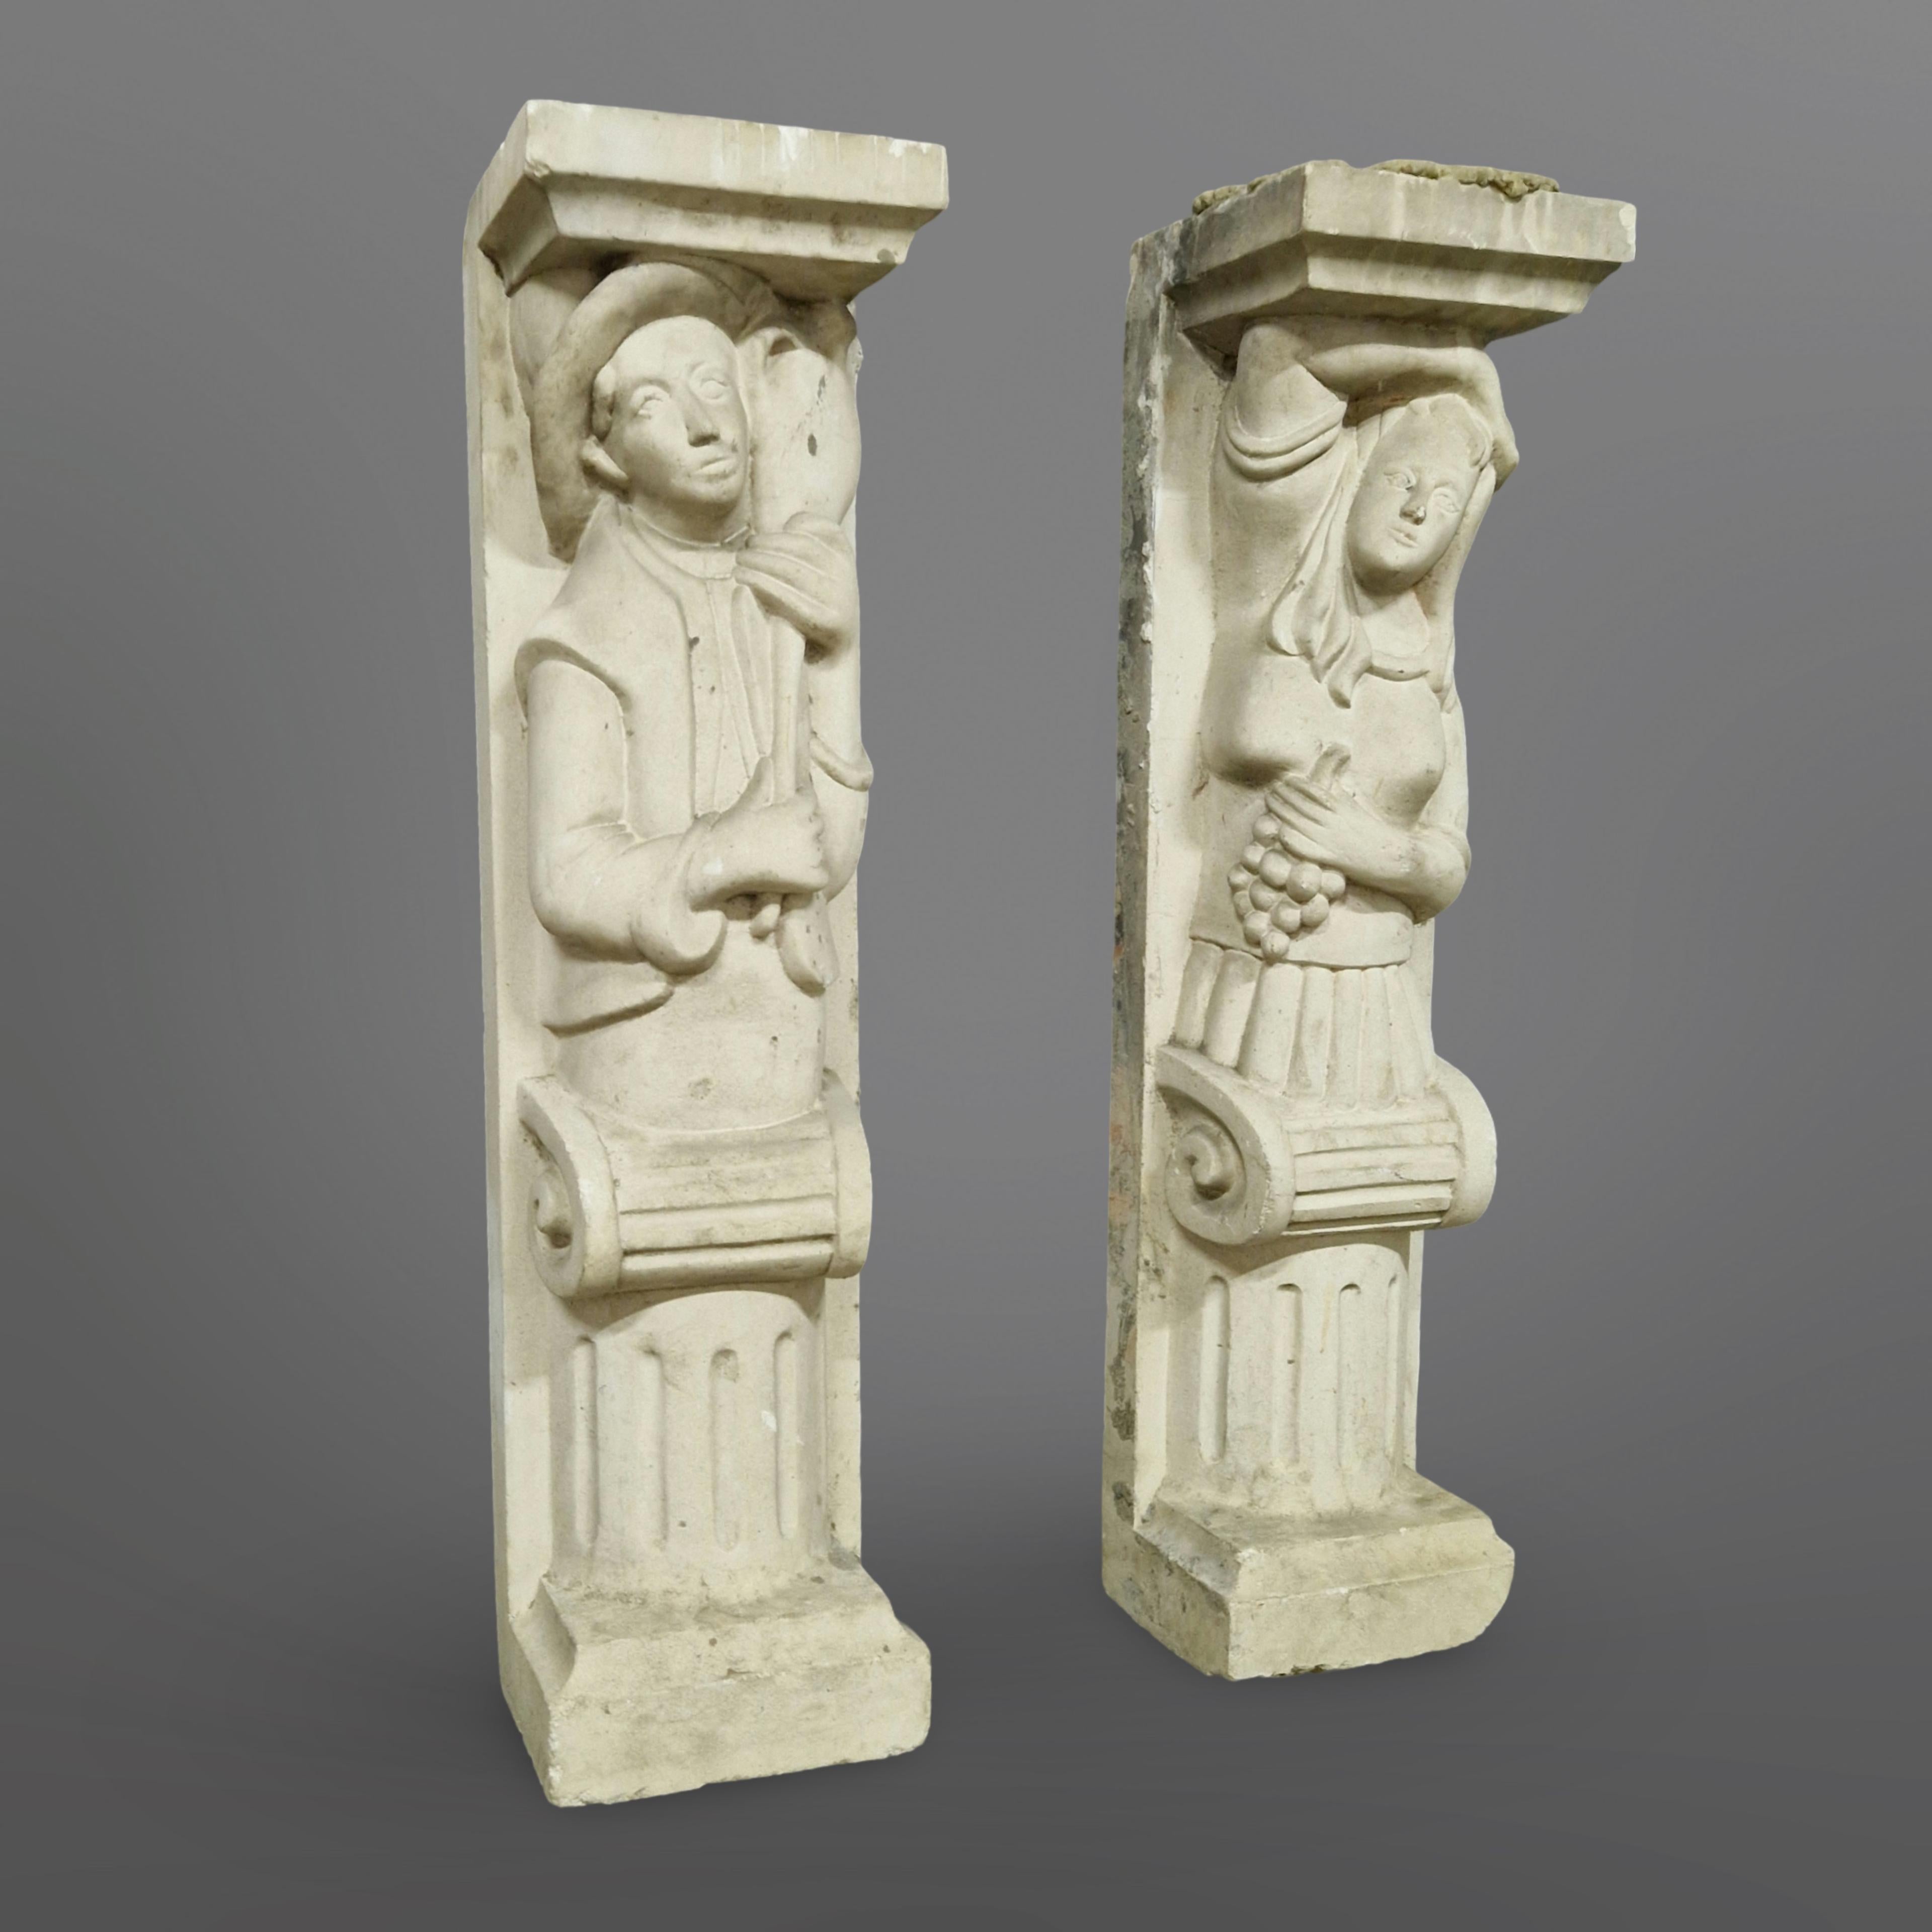 Set of two sculpted architectural columns. They are made from some kind of cast stone or plaster. They were probably meant as fireplace columns seeing the height of 104cm. They have concrete residue so they were actually used. Unfortunately we have